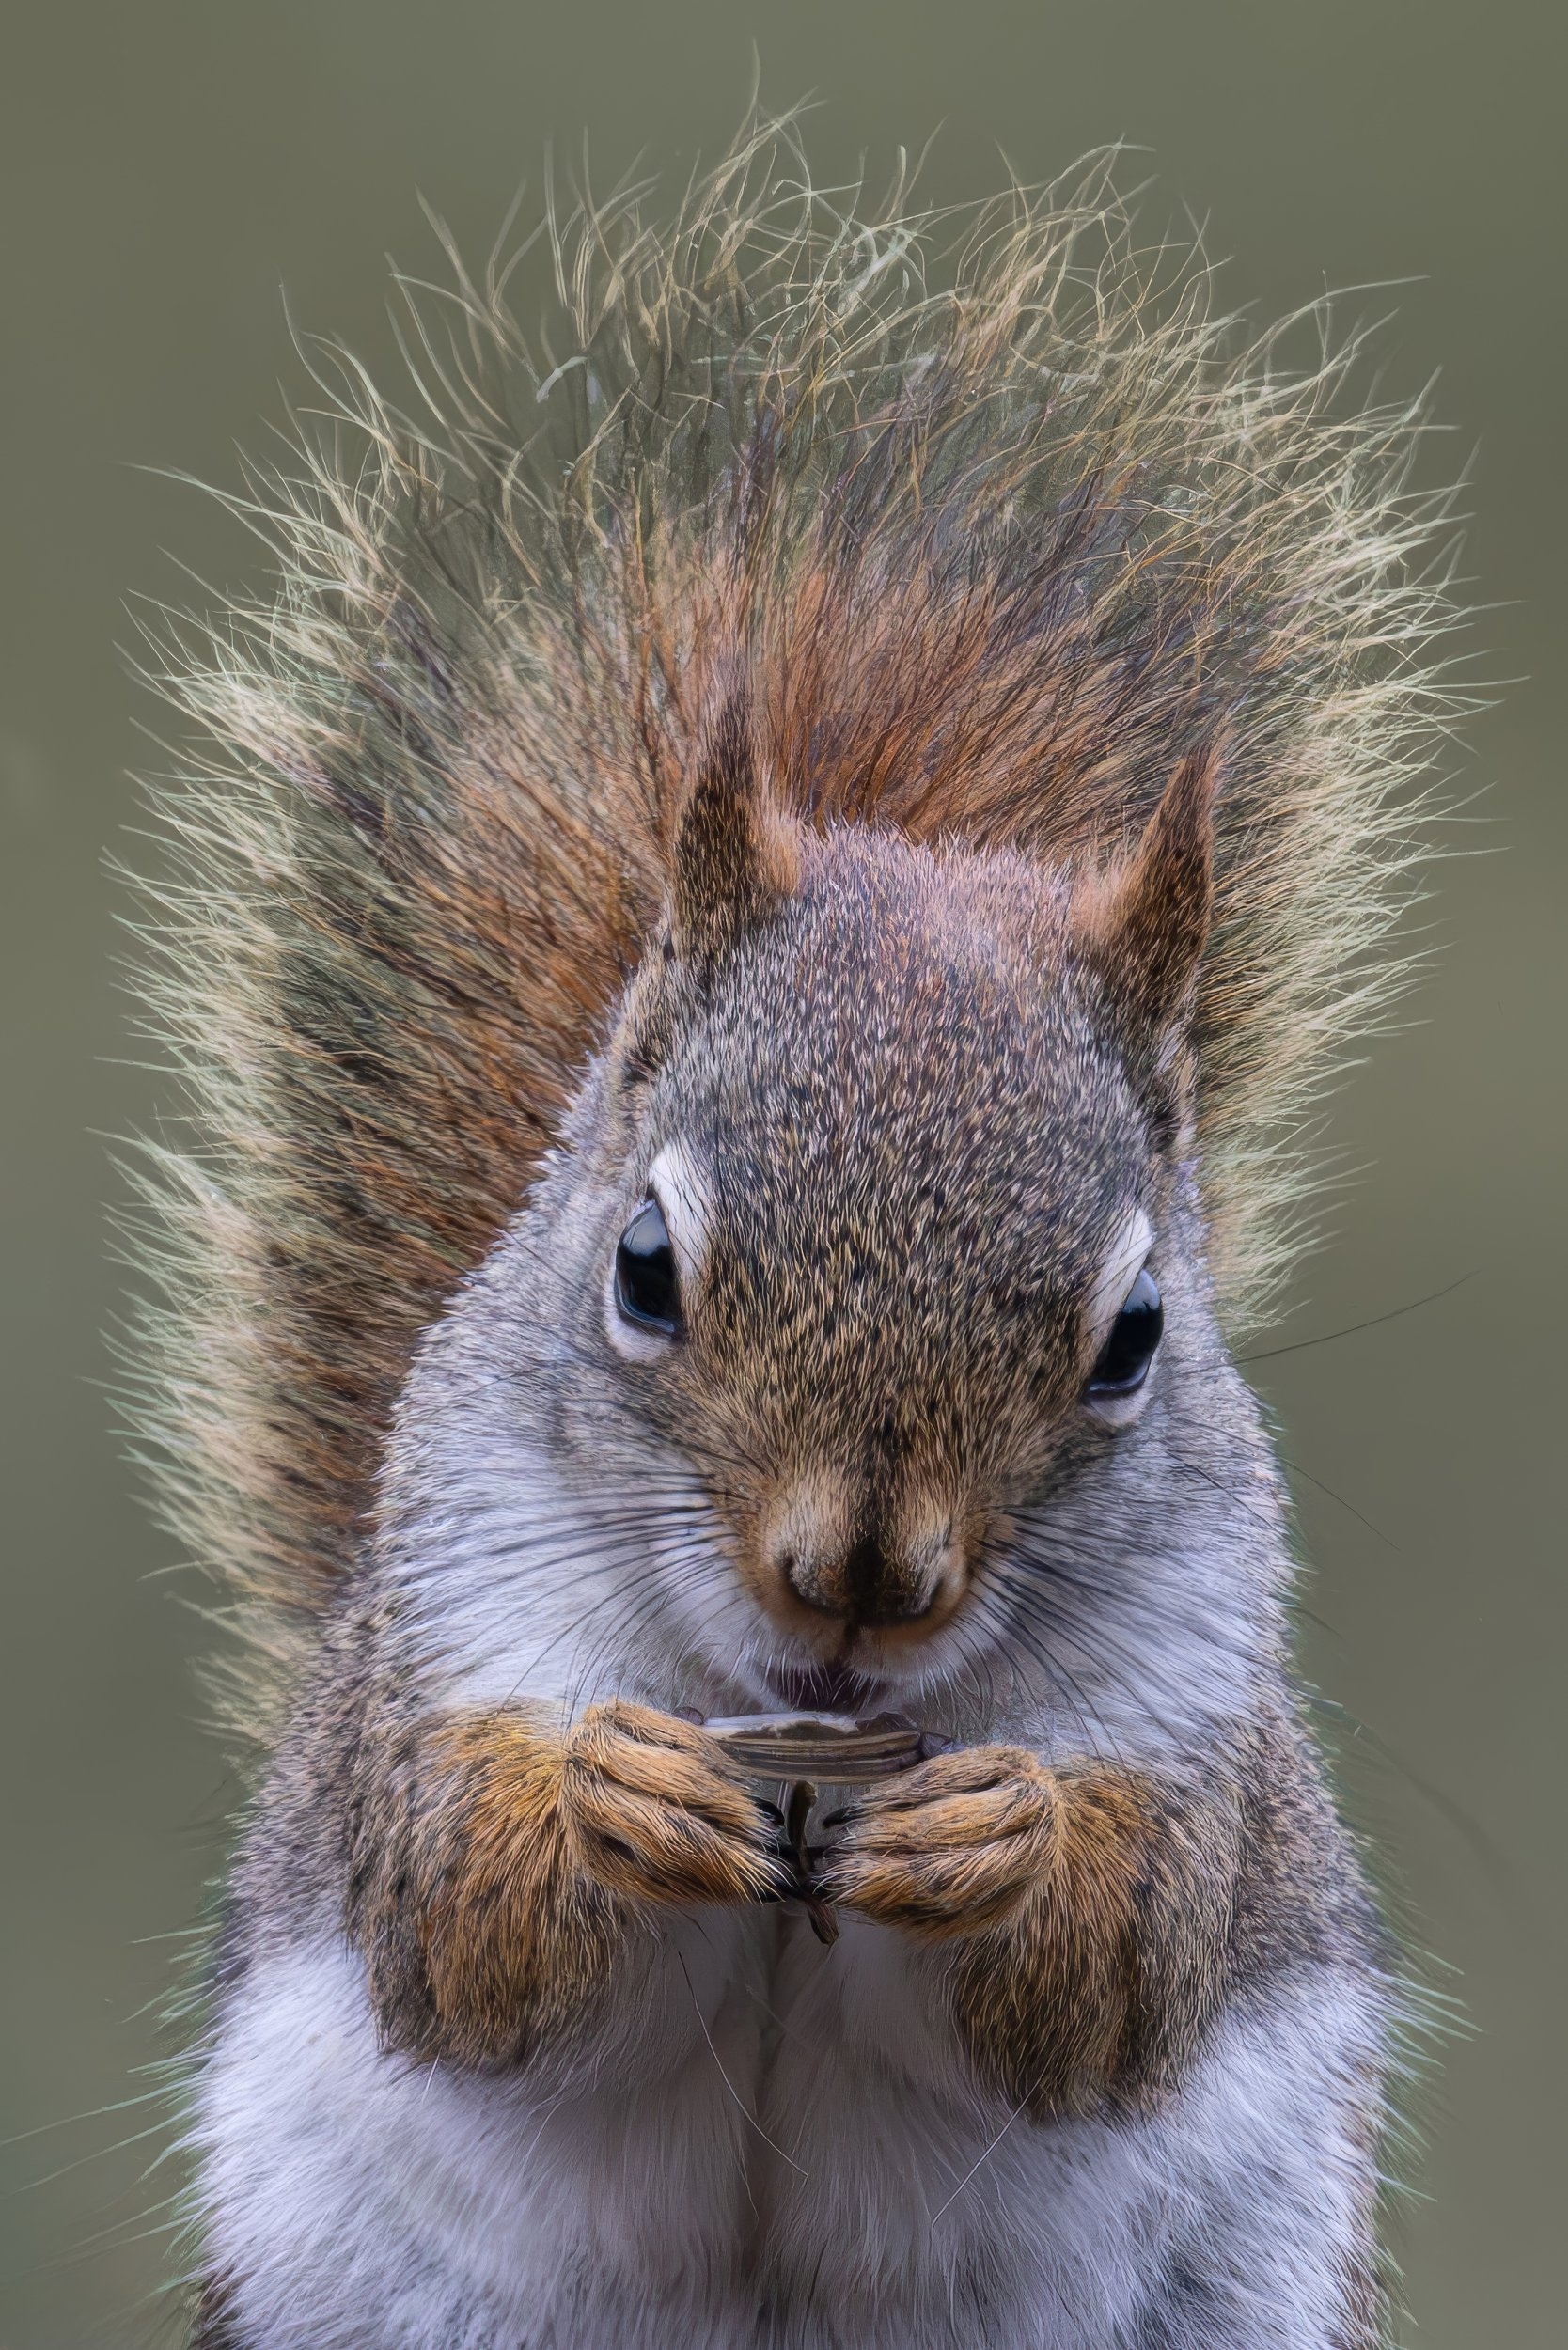 American red squirrel with a seed.jpg